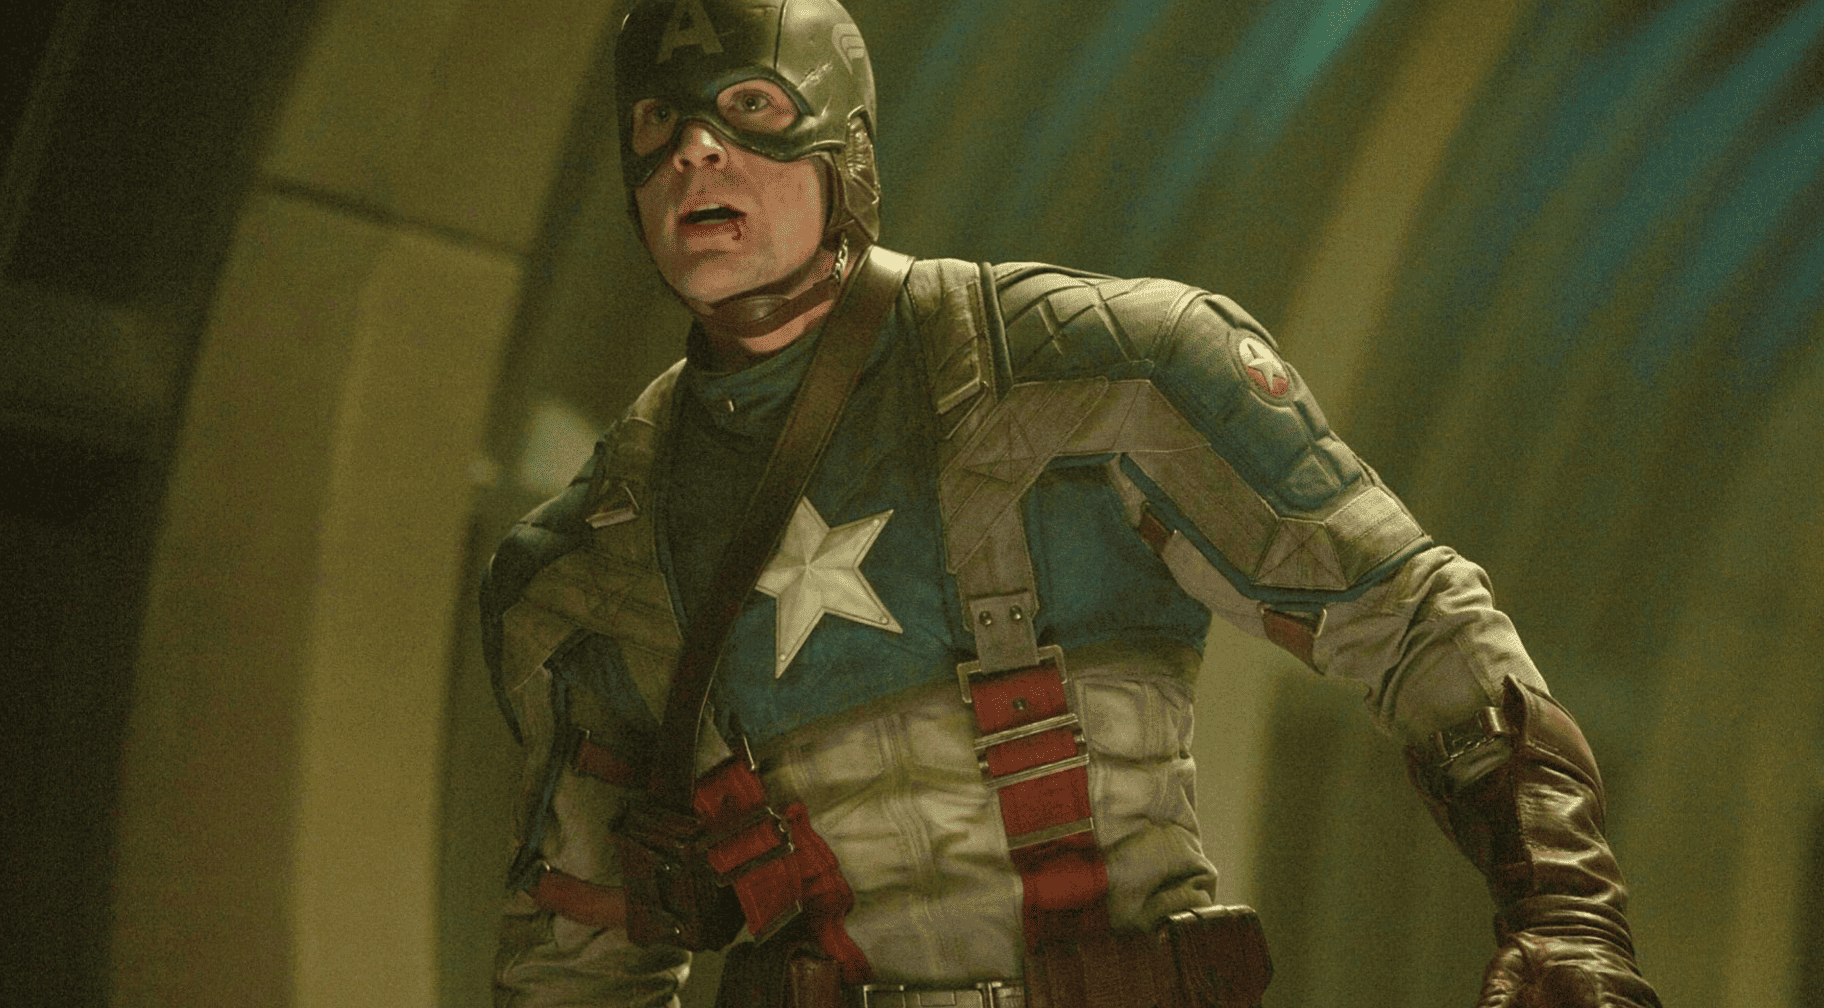 Captain America is suited up and worse for wear in this image from Disney Plus.